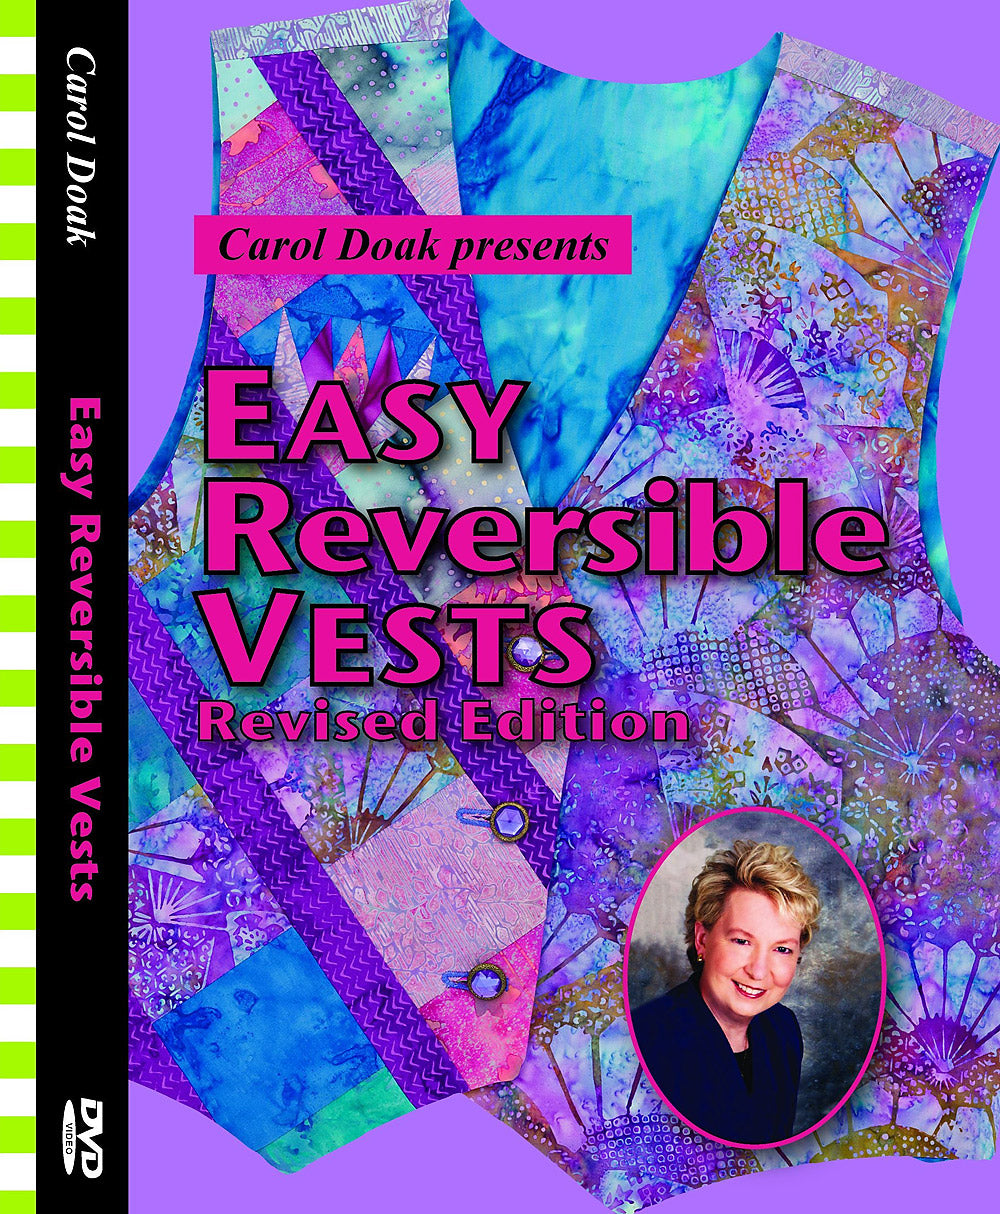 Carol Doak Presents Easy Reversible Vests (Revised Edition) Video on DVD for C&T Publishing